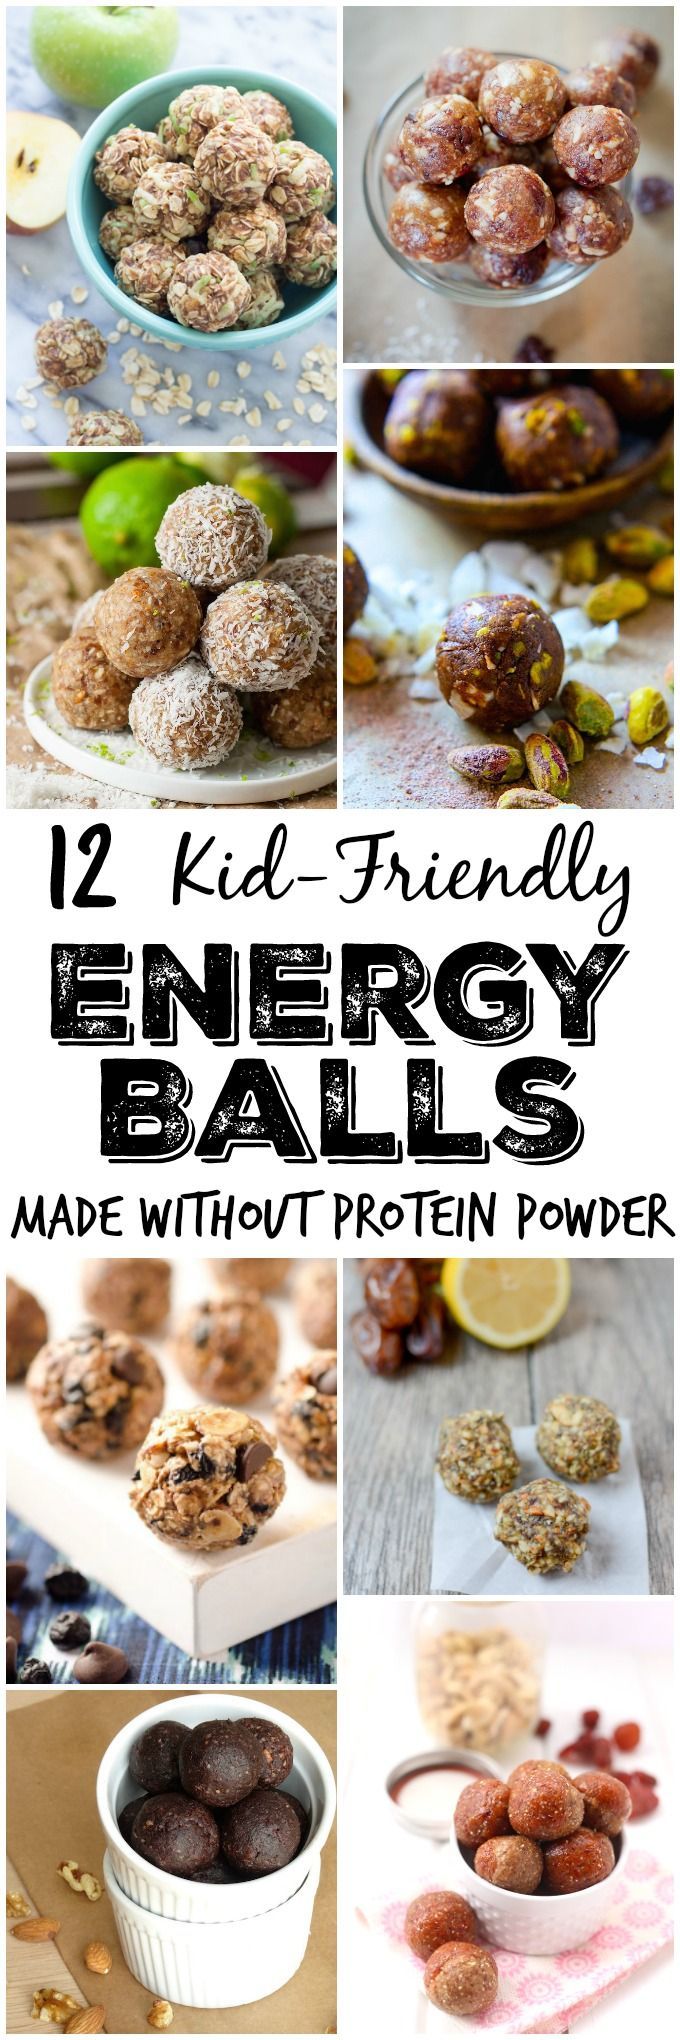 Looking for a quick, healthy snack made with real food ingredients? Here are 12 kid-friendly energy ball recipes made without